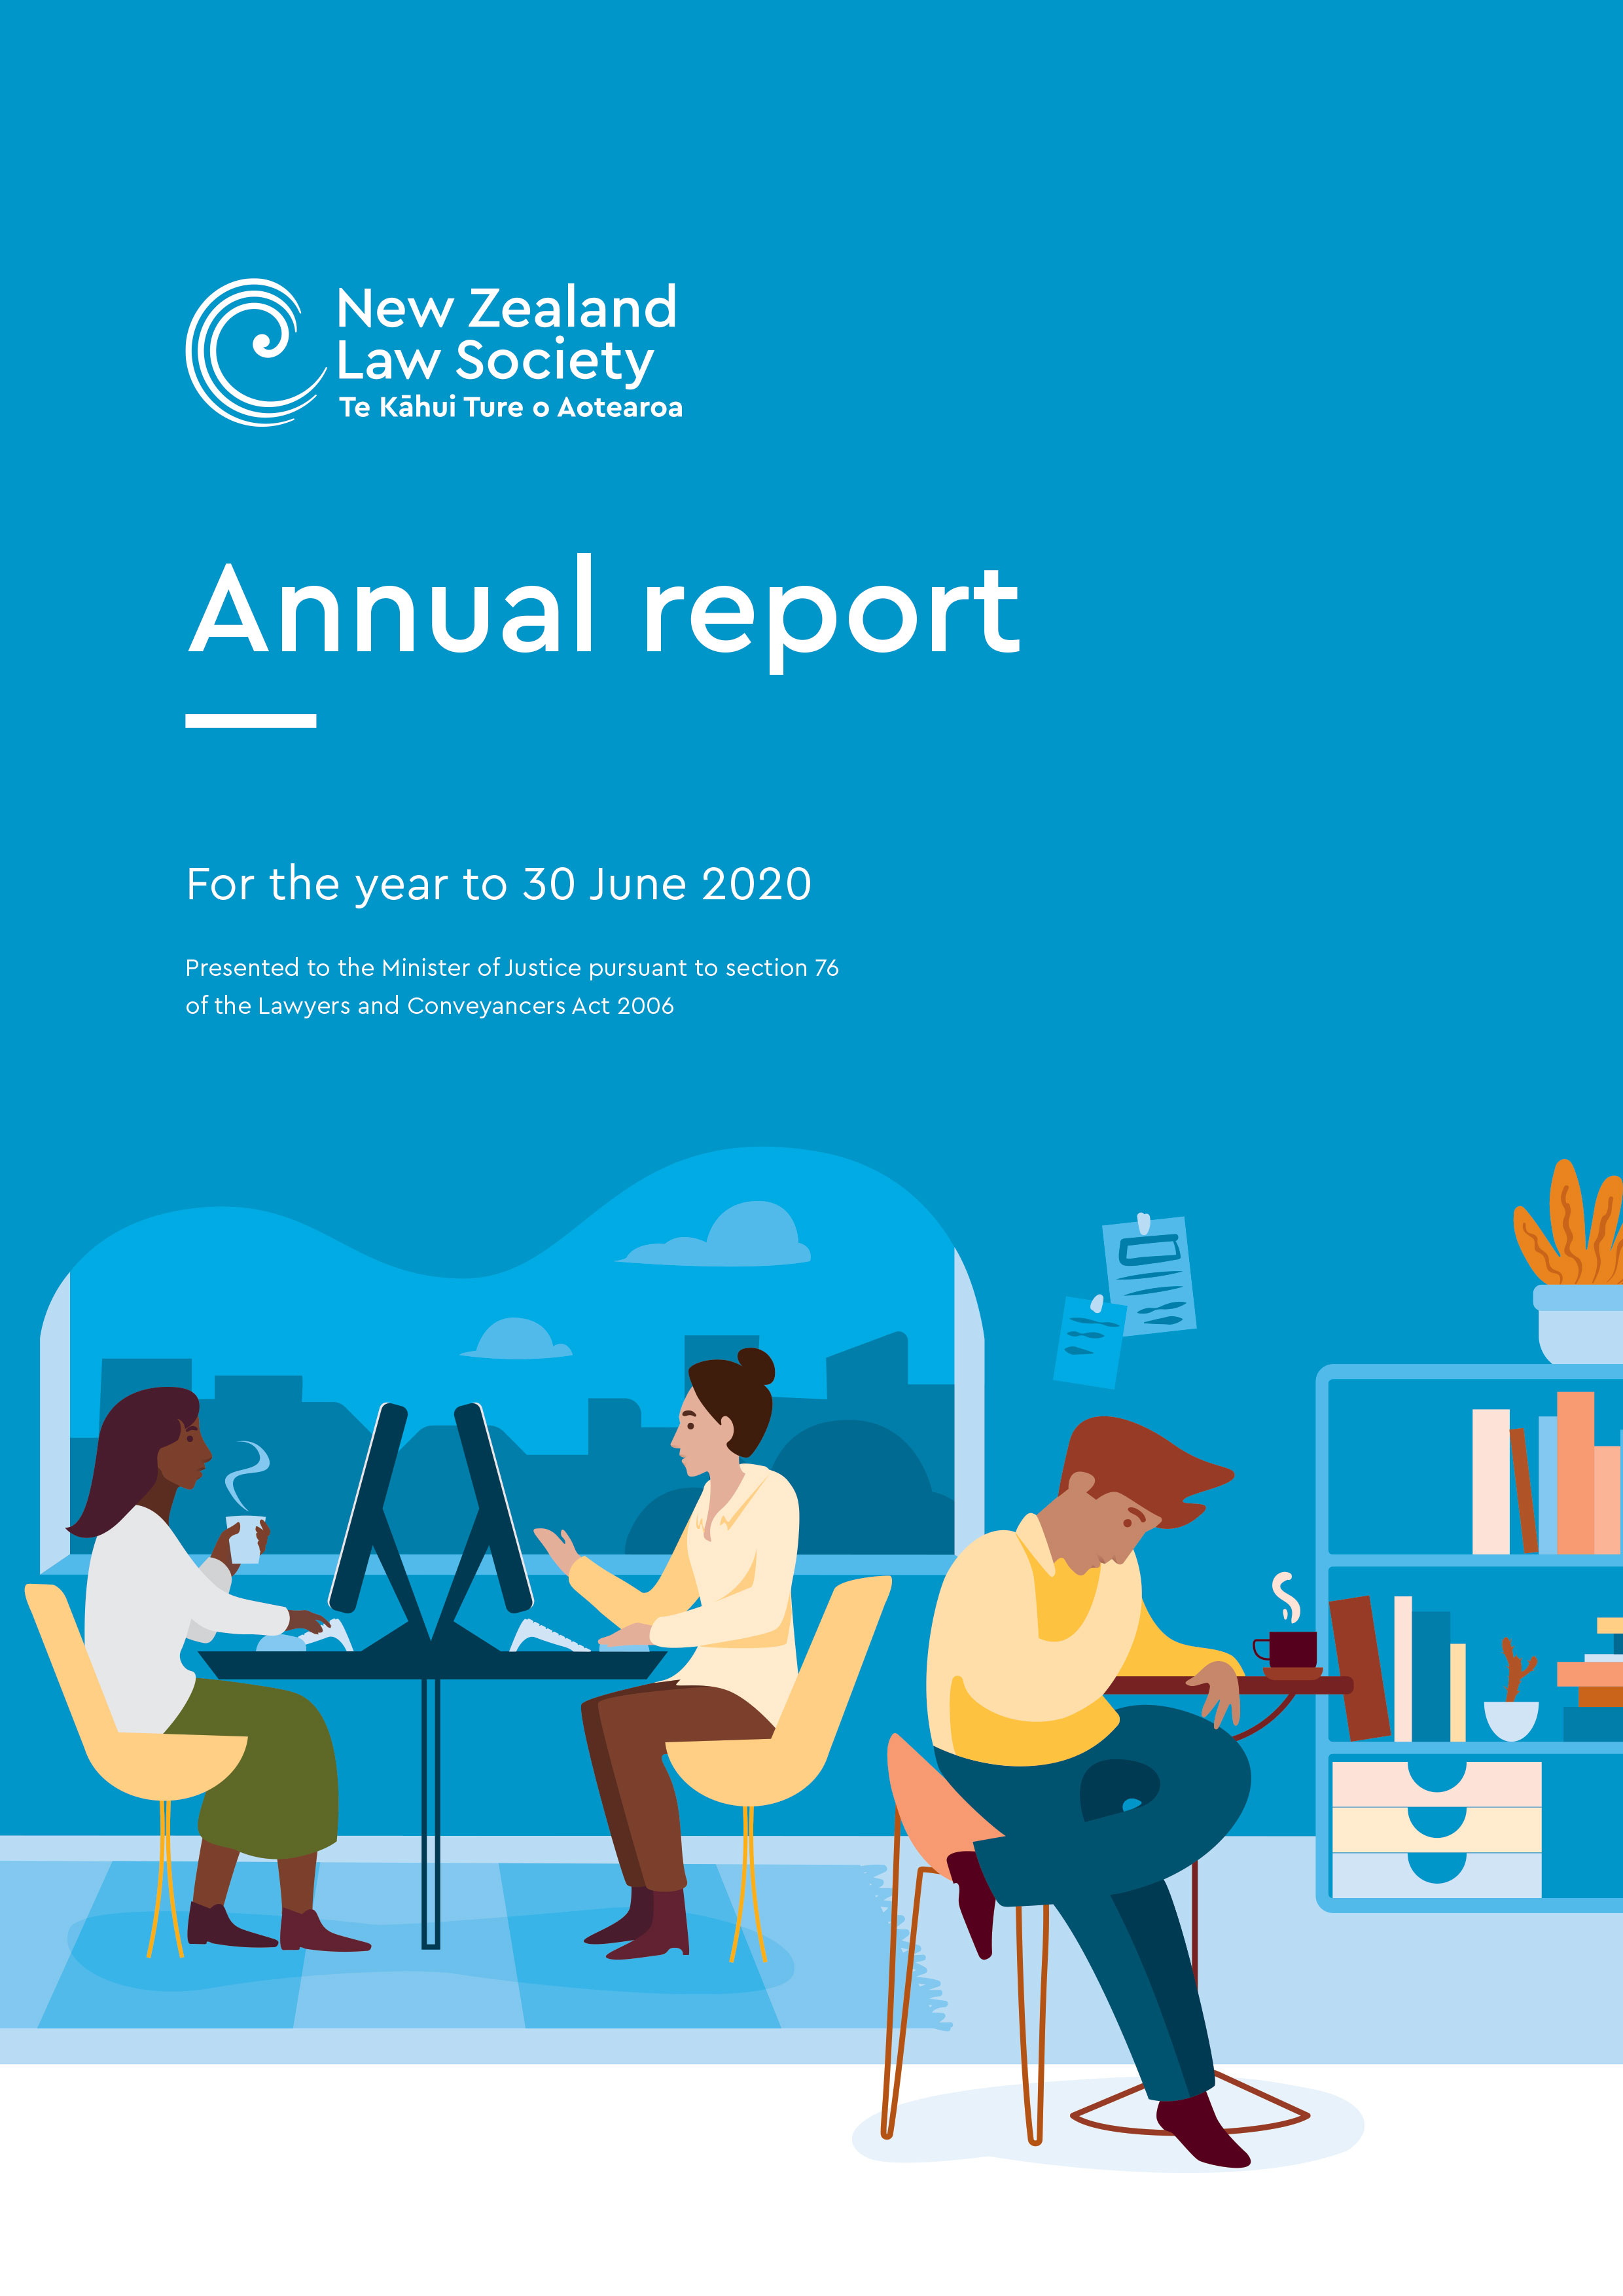 Front page of Annual Report, blue background with illustrated people working in an office.